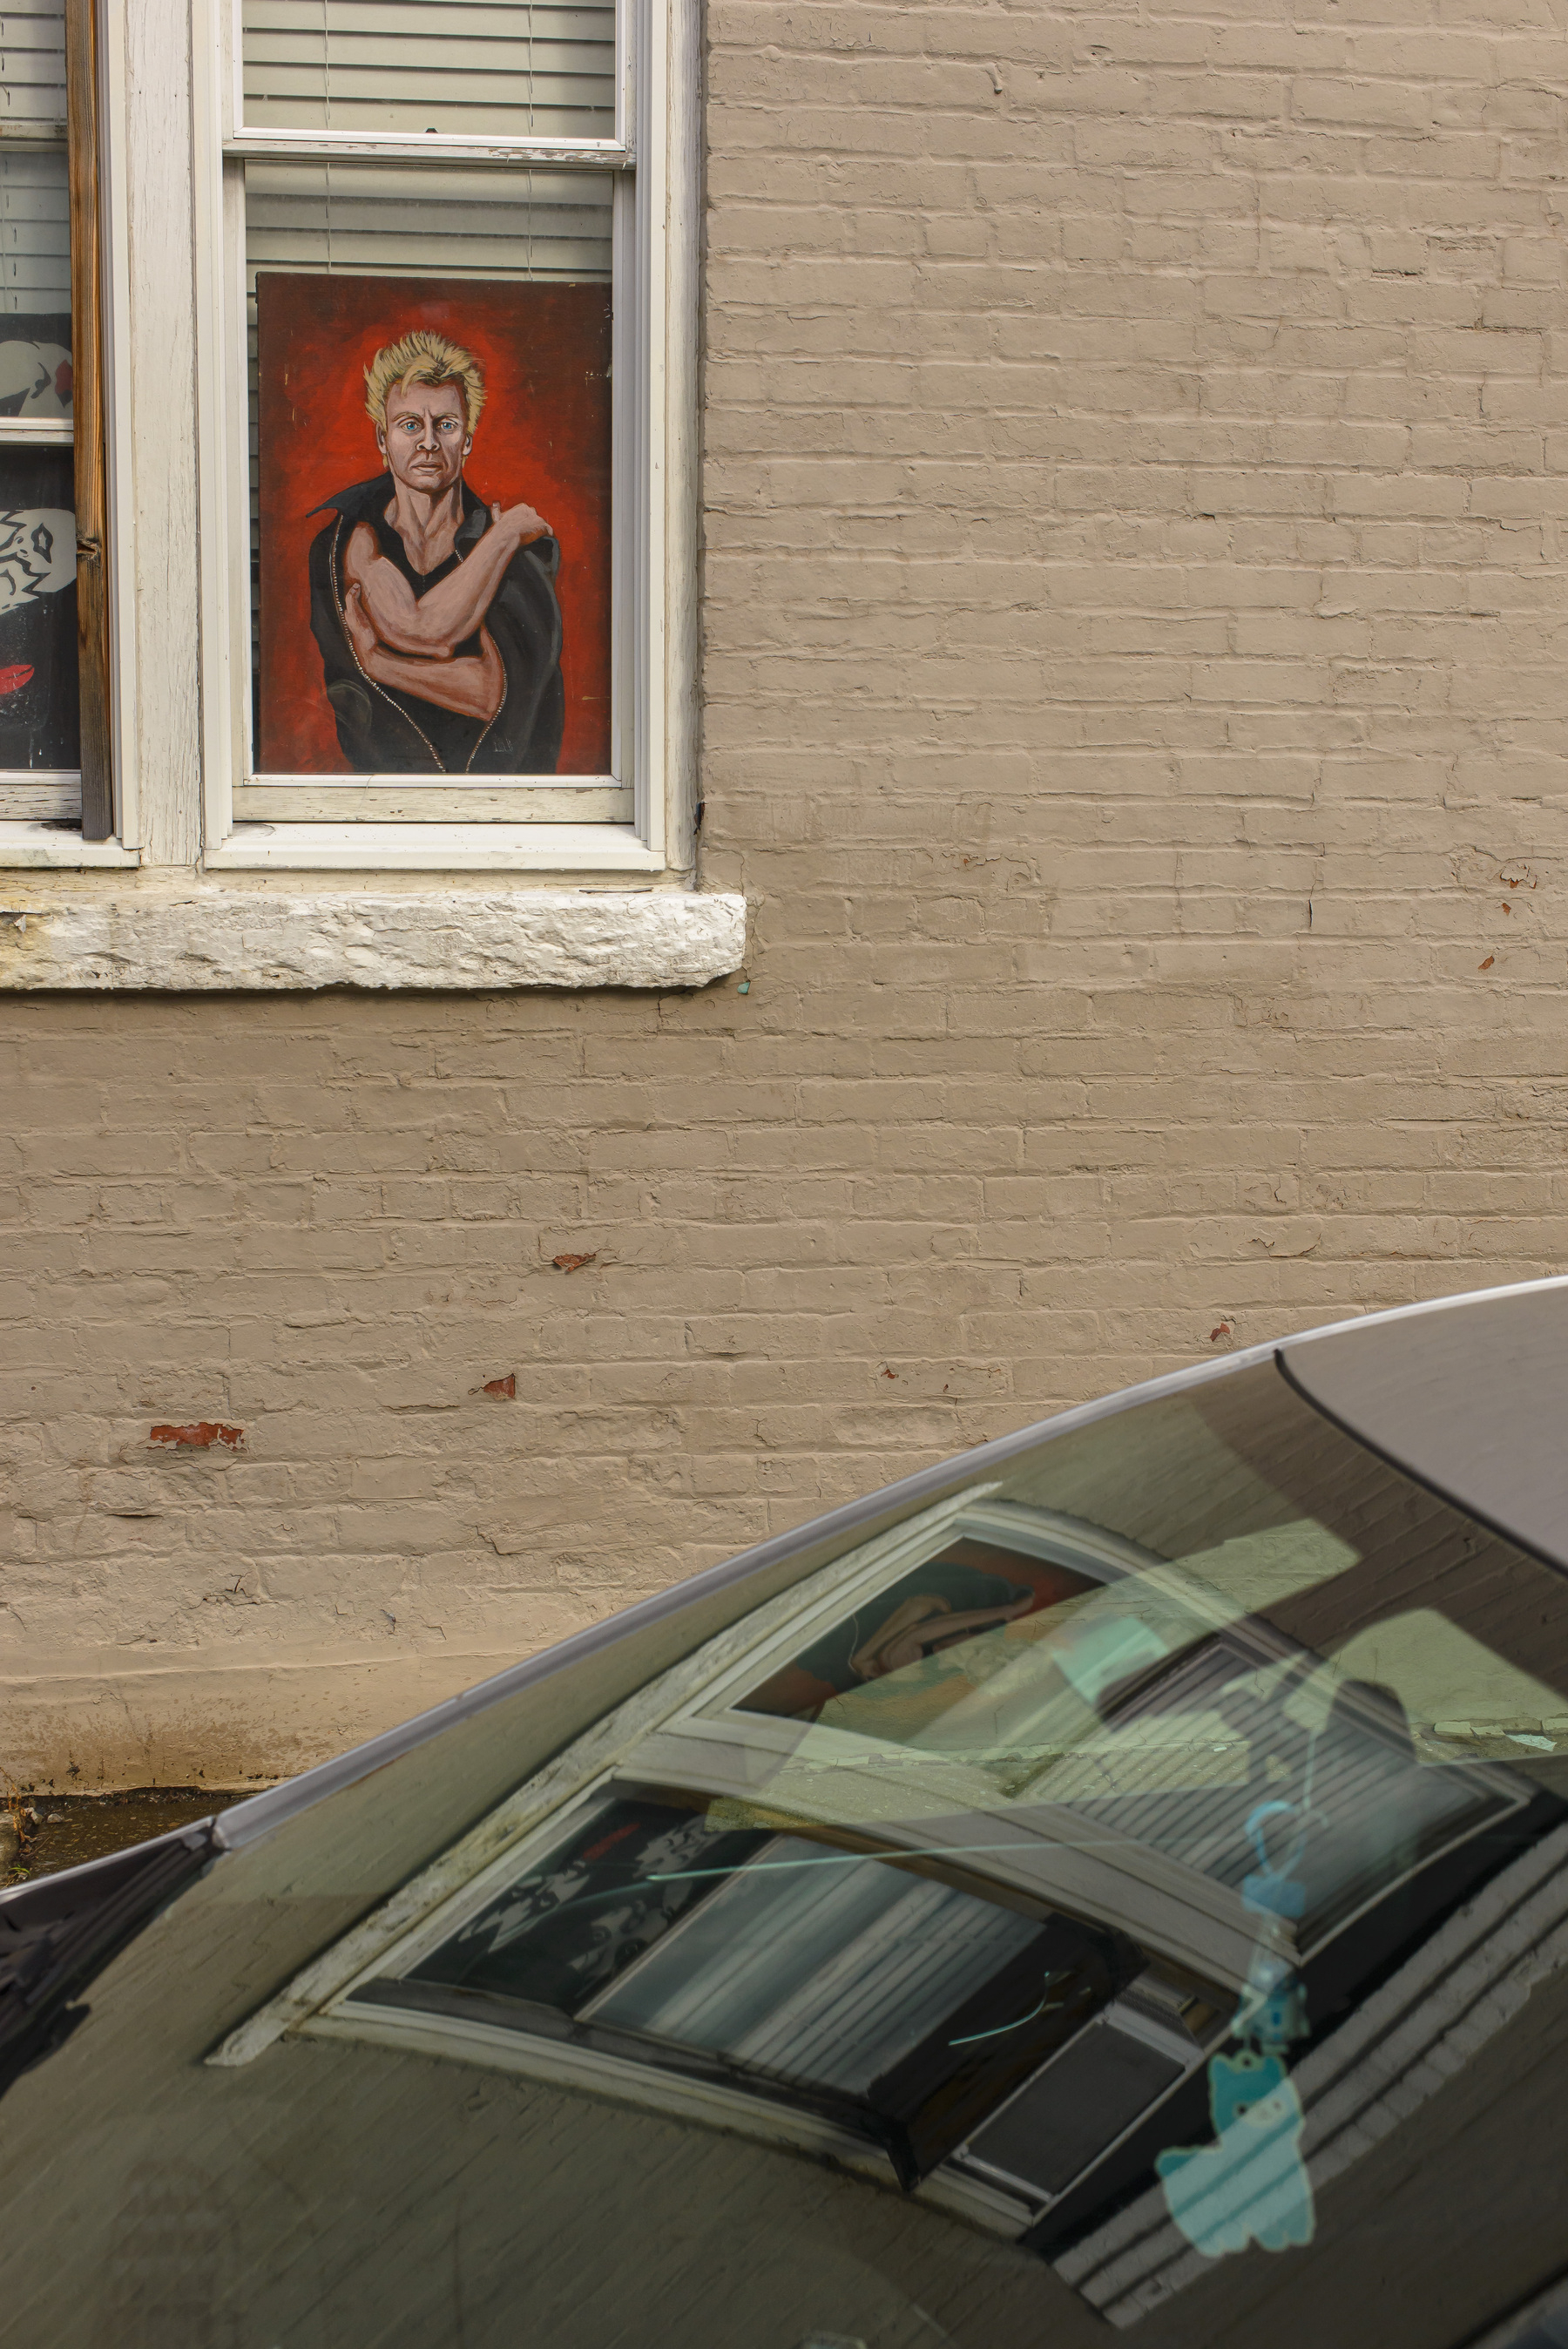 poster of a man in a window in the upper left corner, car windshield across bottom of frame, window reflected in the windshield